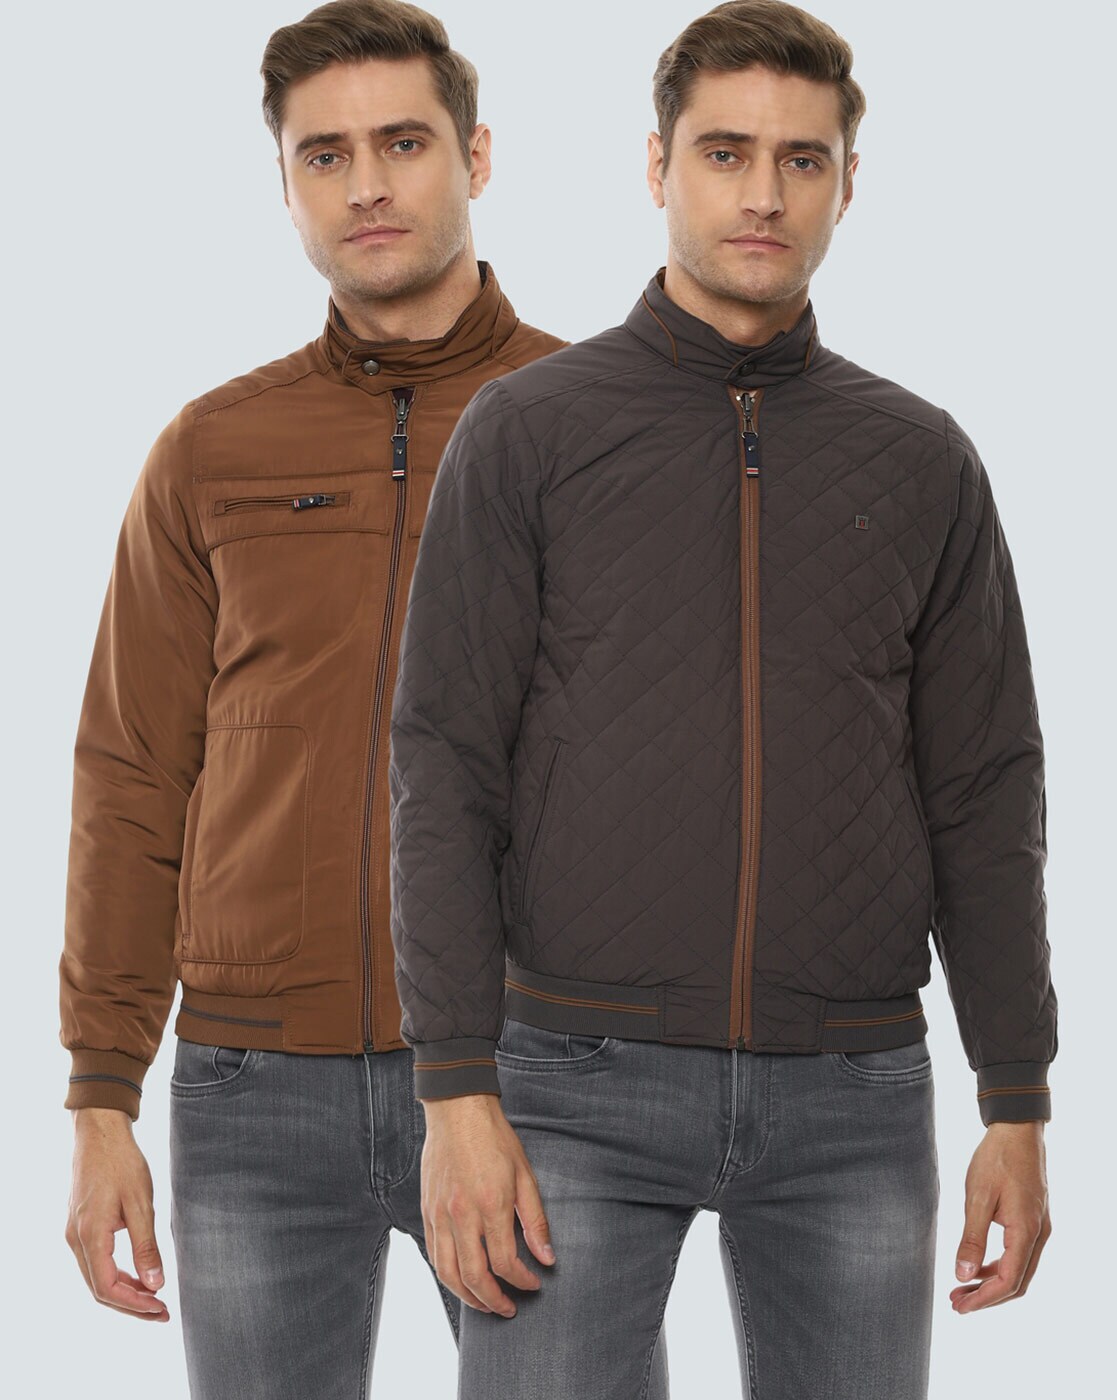 Louis Philippe Black Jacket Lyjkcbop in Bangalore - Dealers, Manufacturers  & Suppliers -Justdial